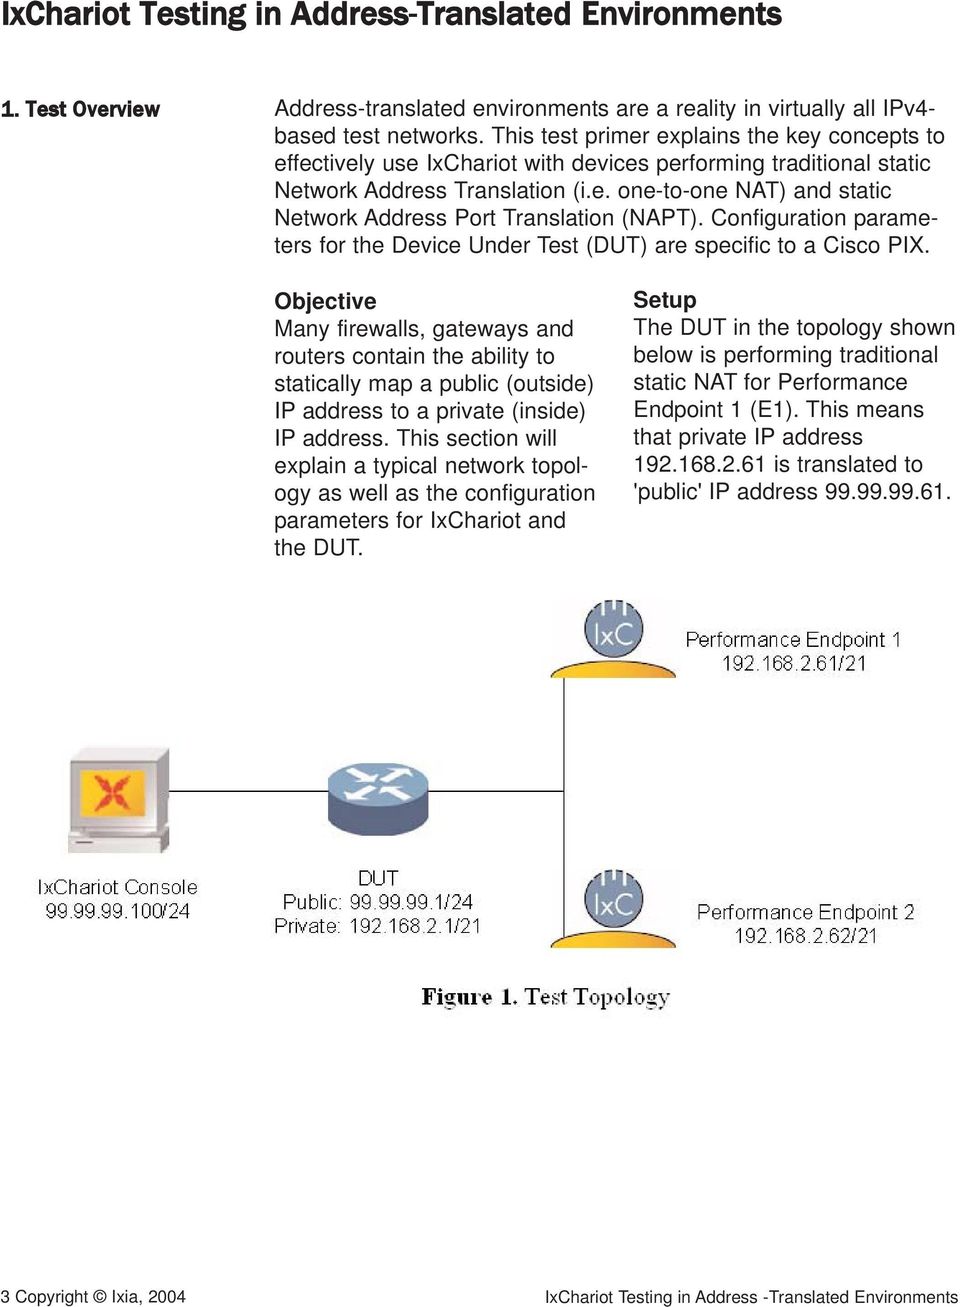 Configuration parameters for the Device Under Test (DUT) are specific to a Cisco PIX.